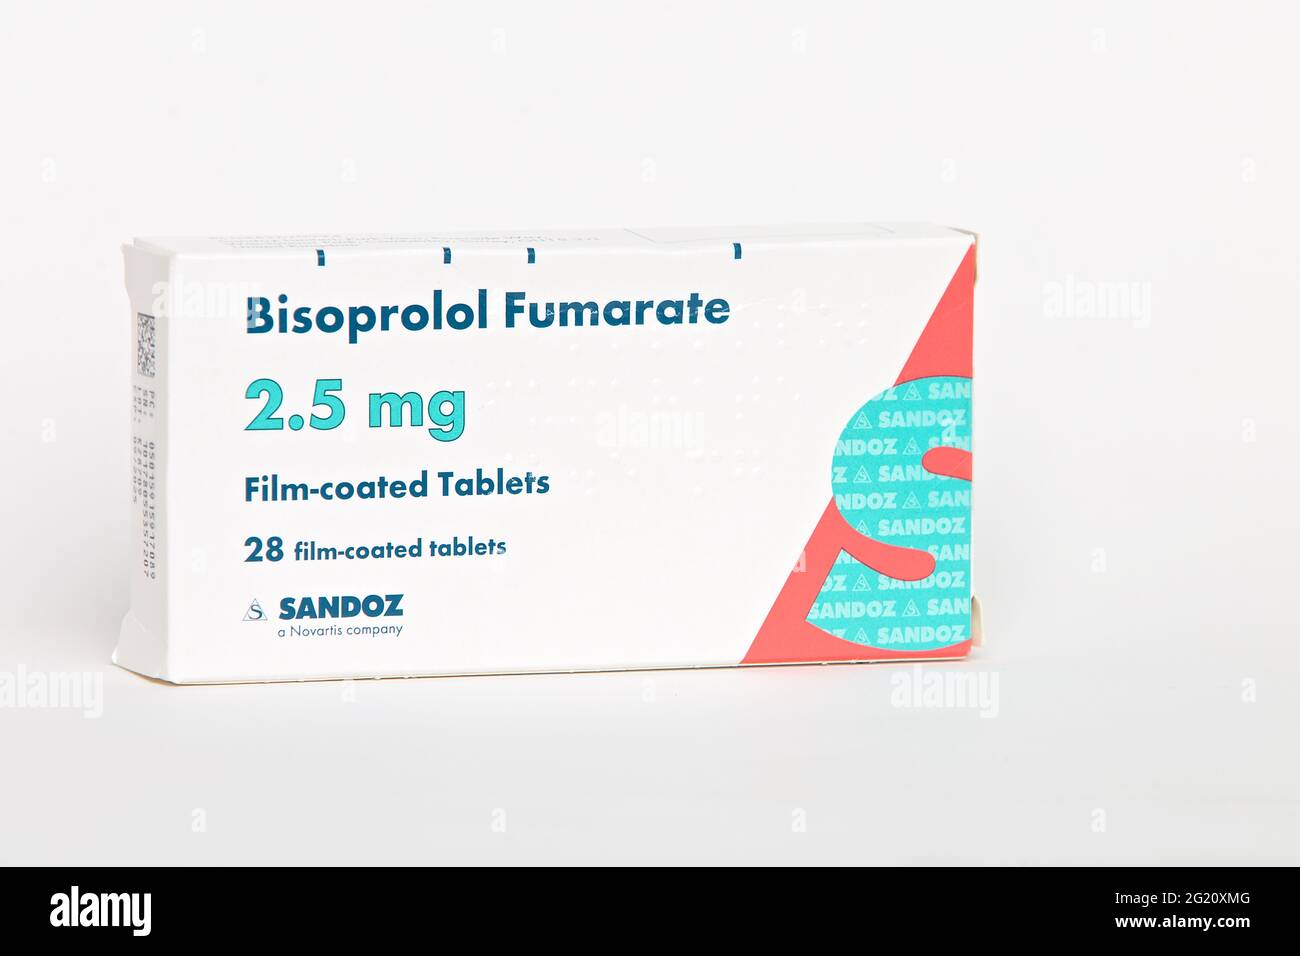 Bisoprolol is a medicine used to treat high blood pressure (hypertension) and heart failure. Stock Photo